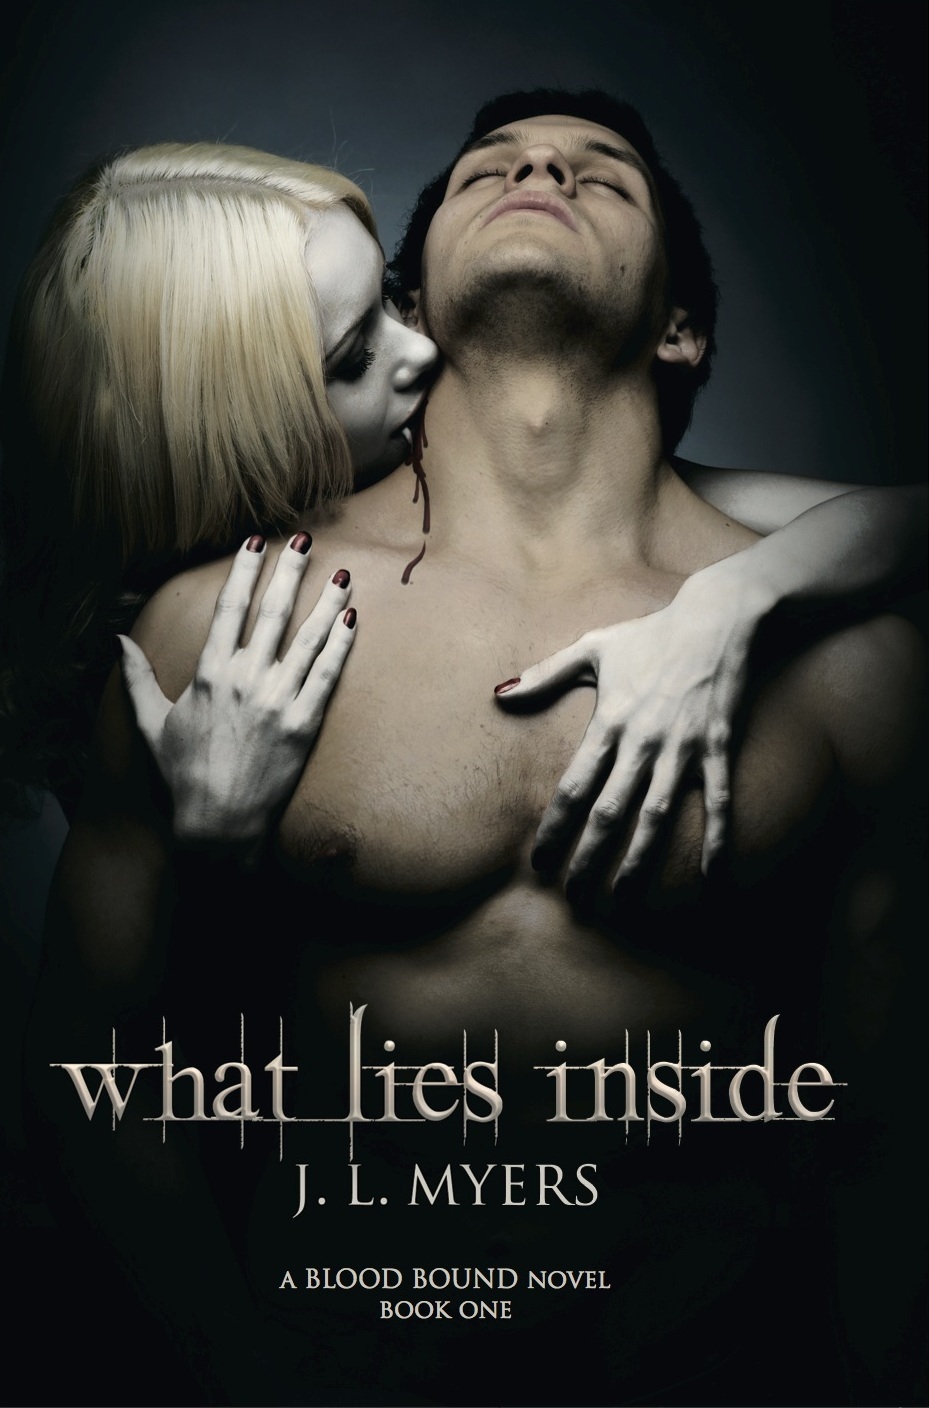 What Lies Inside (Blood Bound Series Book 1) by J.L. Myers